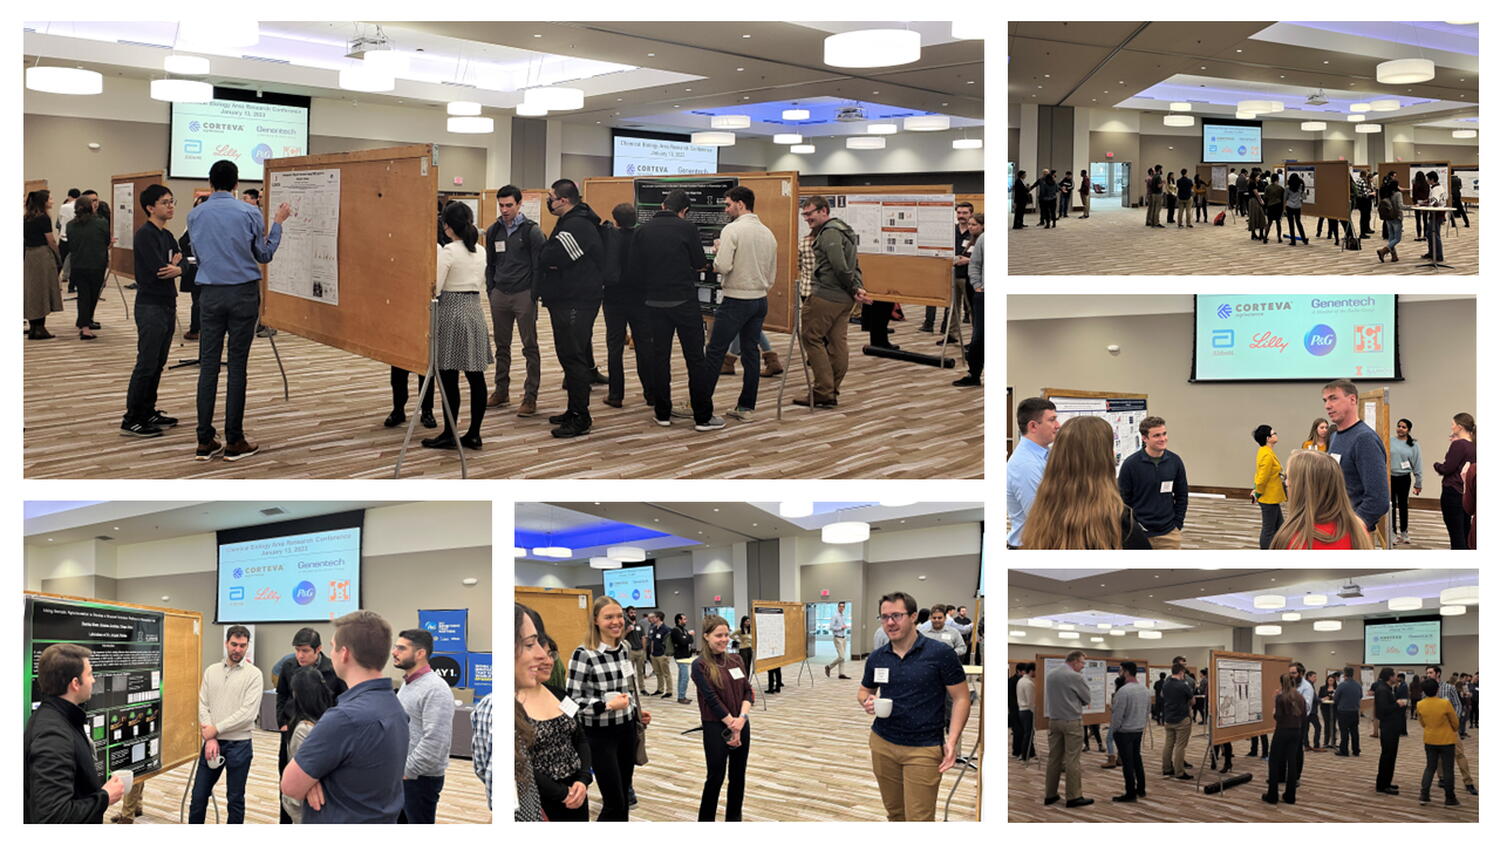 Six photos showing a crowd of people in a big room standing and listening to researchers at mobile bulletin boards present their research.